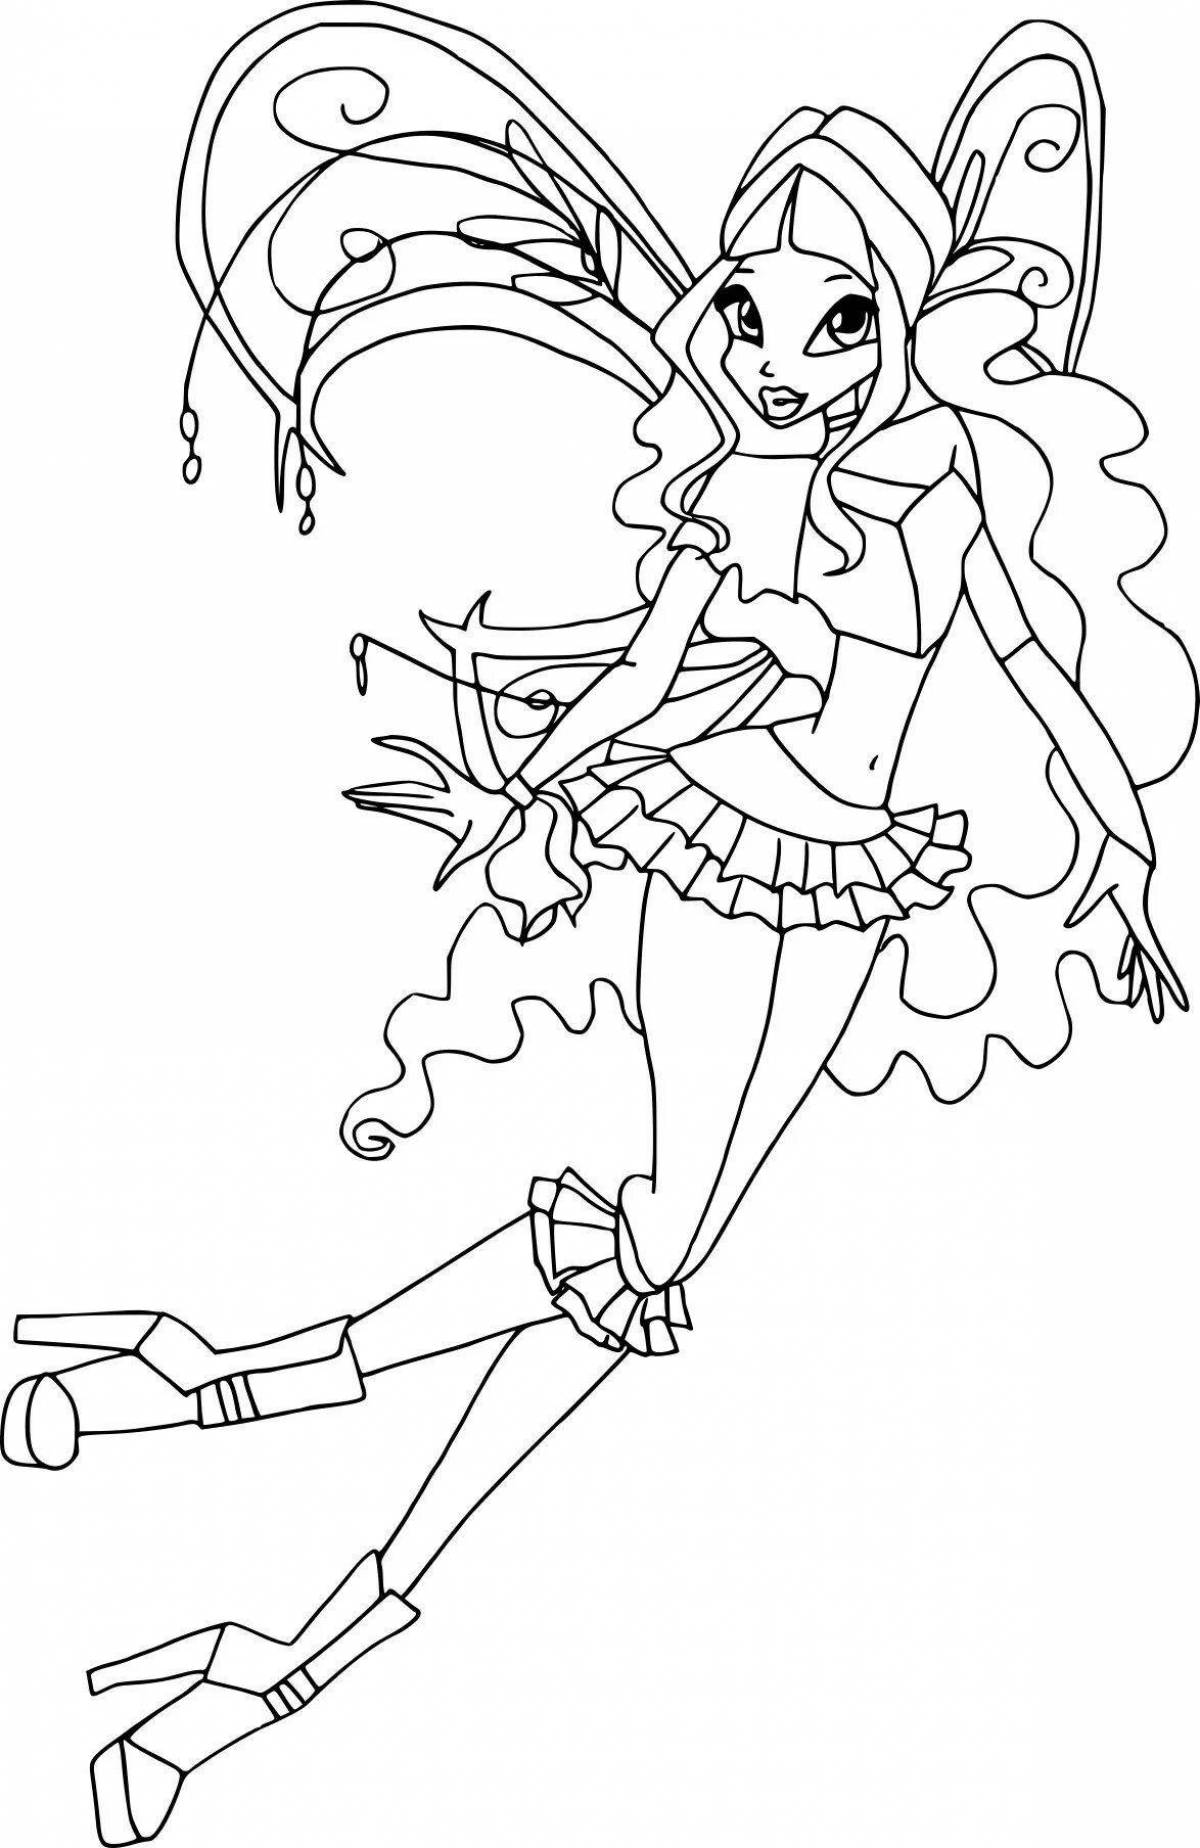 Radiant winx layla believix coloring page